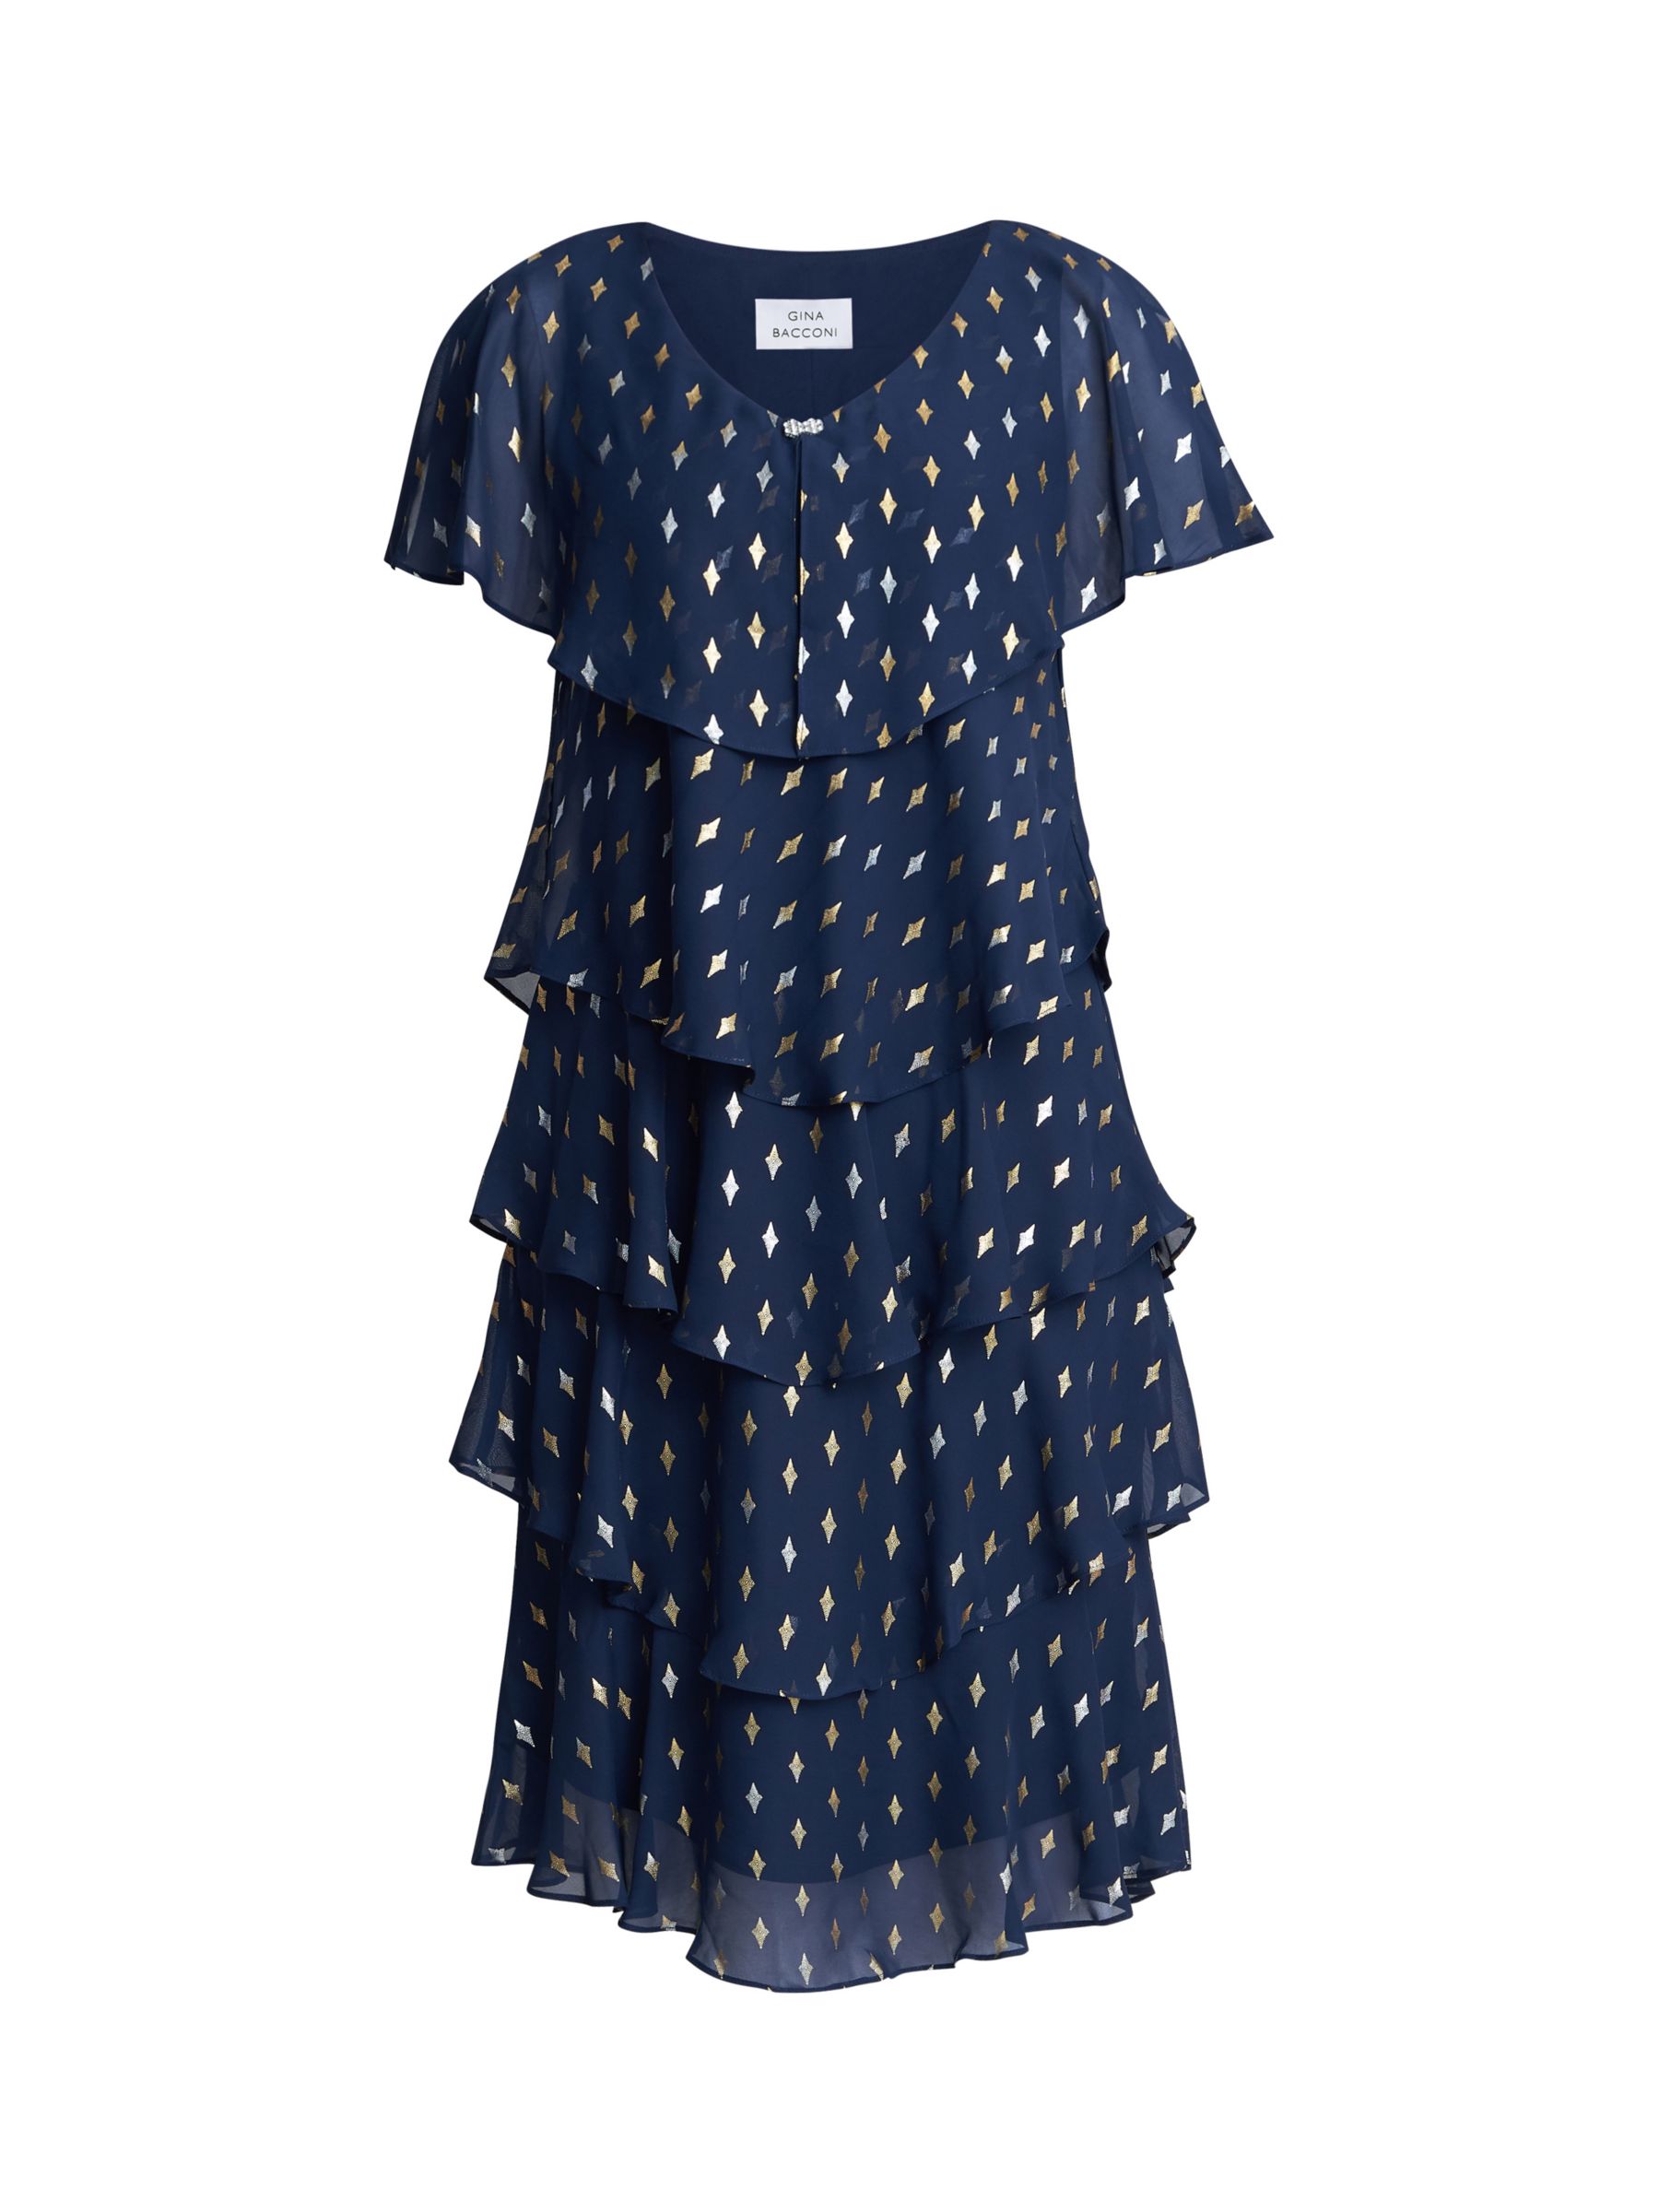 Buy Gina Bacconi Sybil Foil Print Tiered Dress, Navy/Gold Online at johnlewis.com